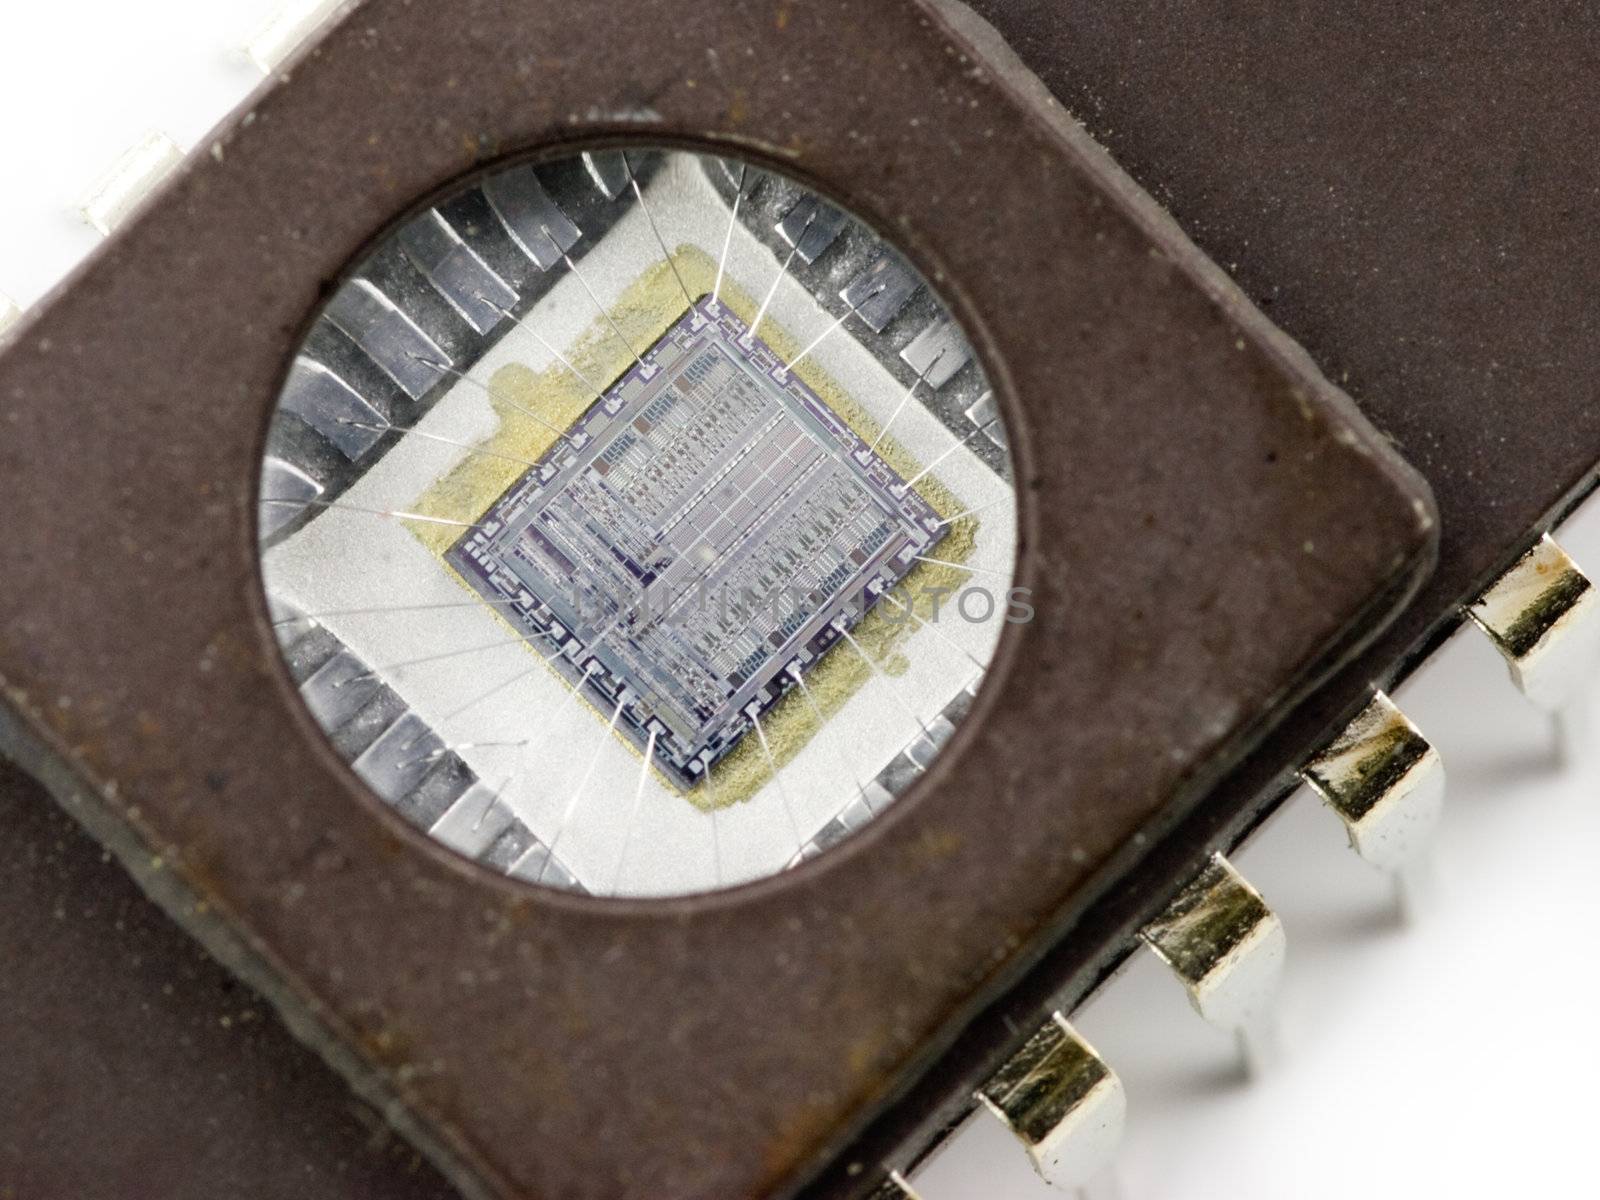 EPROM memory microchip with a transparent window, showing the integrated circuit inside